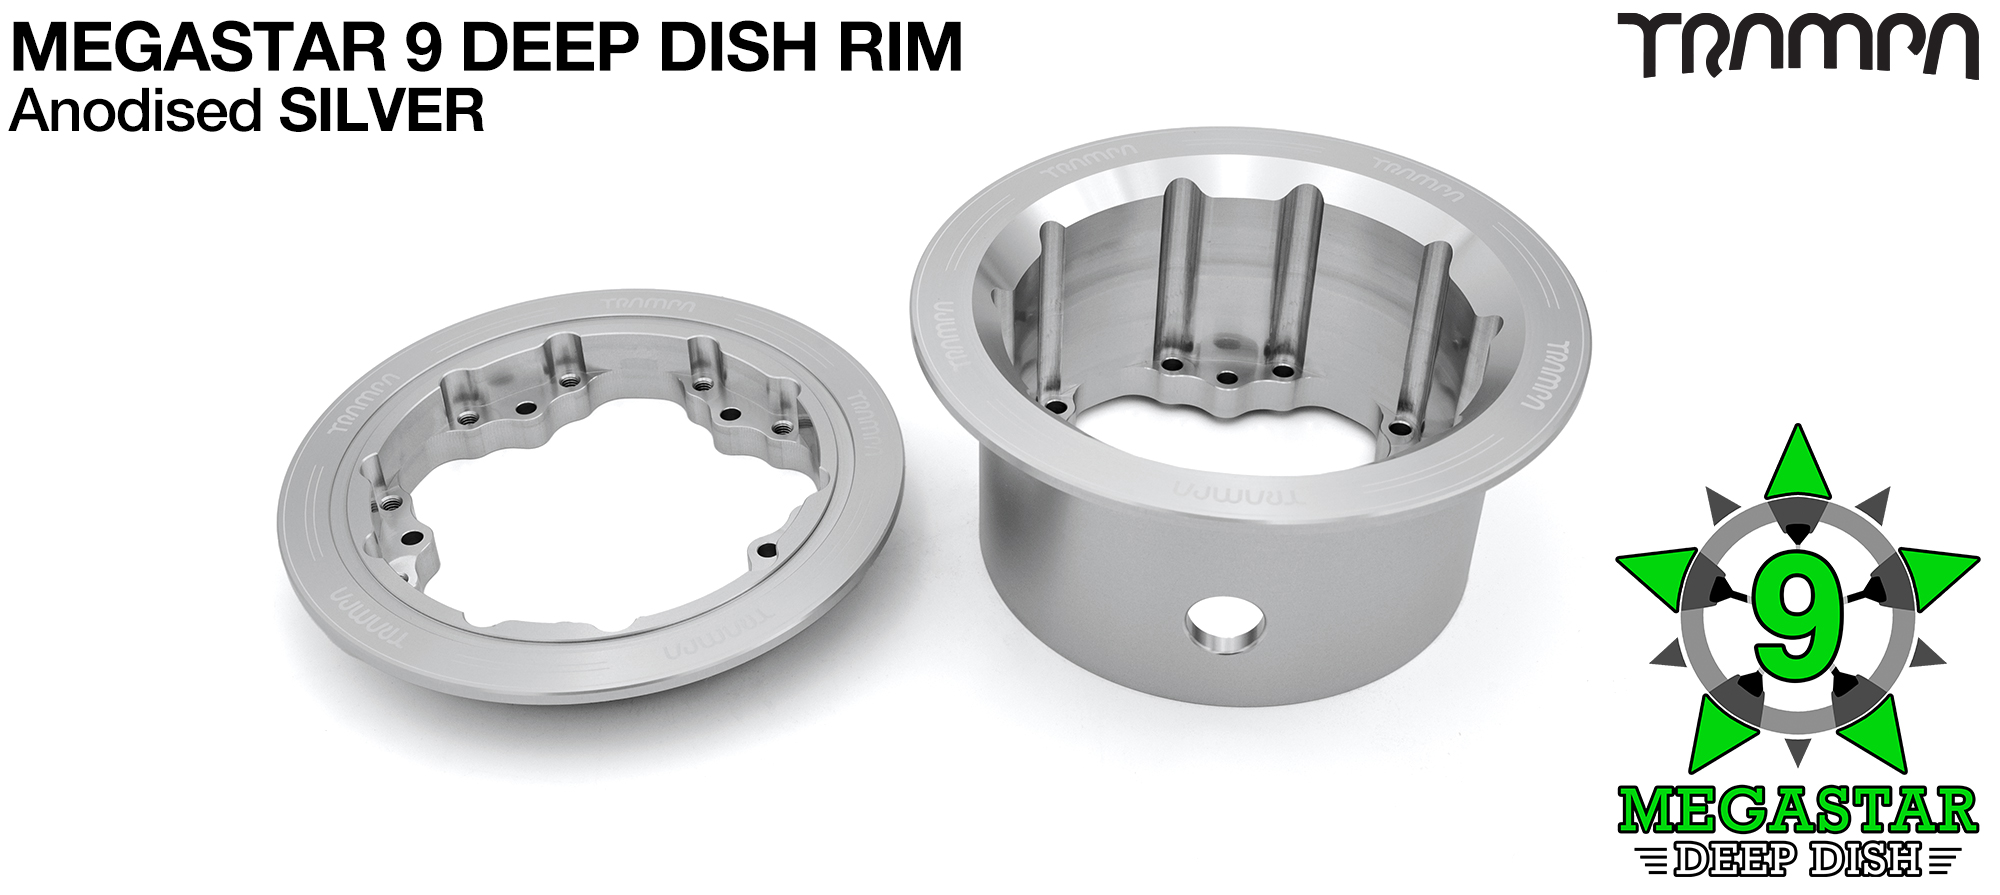 MEGASTAR 9 DEEP-DISH Rims Measure 3.75/4x 3 Inch. The Bearings are positioned OFF-SET & accept 4 Inch Rim Tyres to make 9 or 10 inch Wheels - SILVER